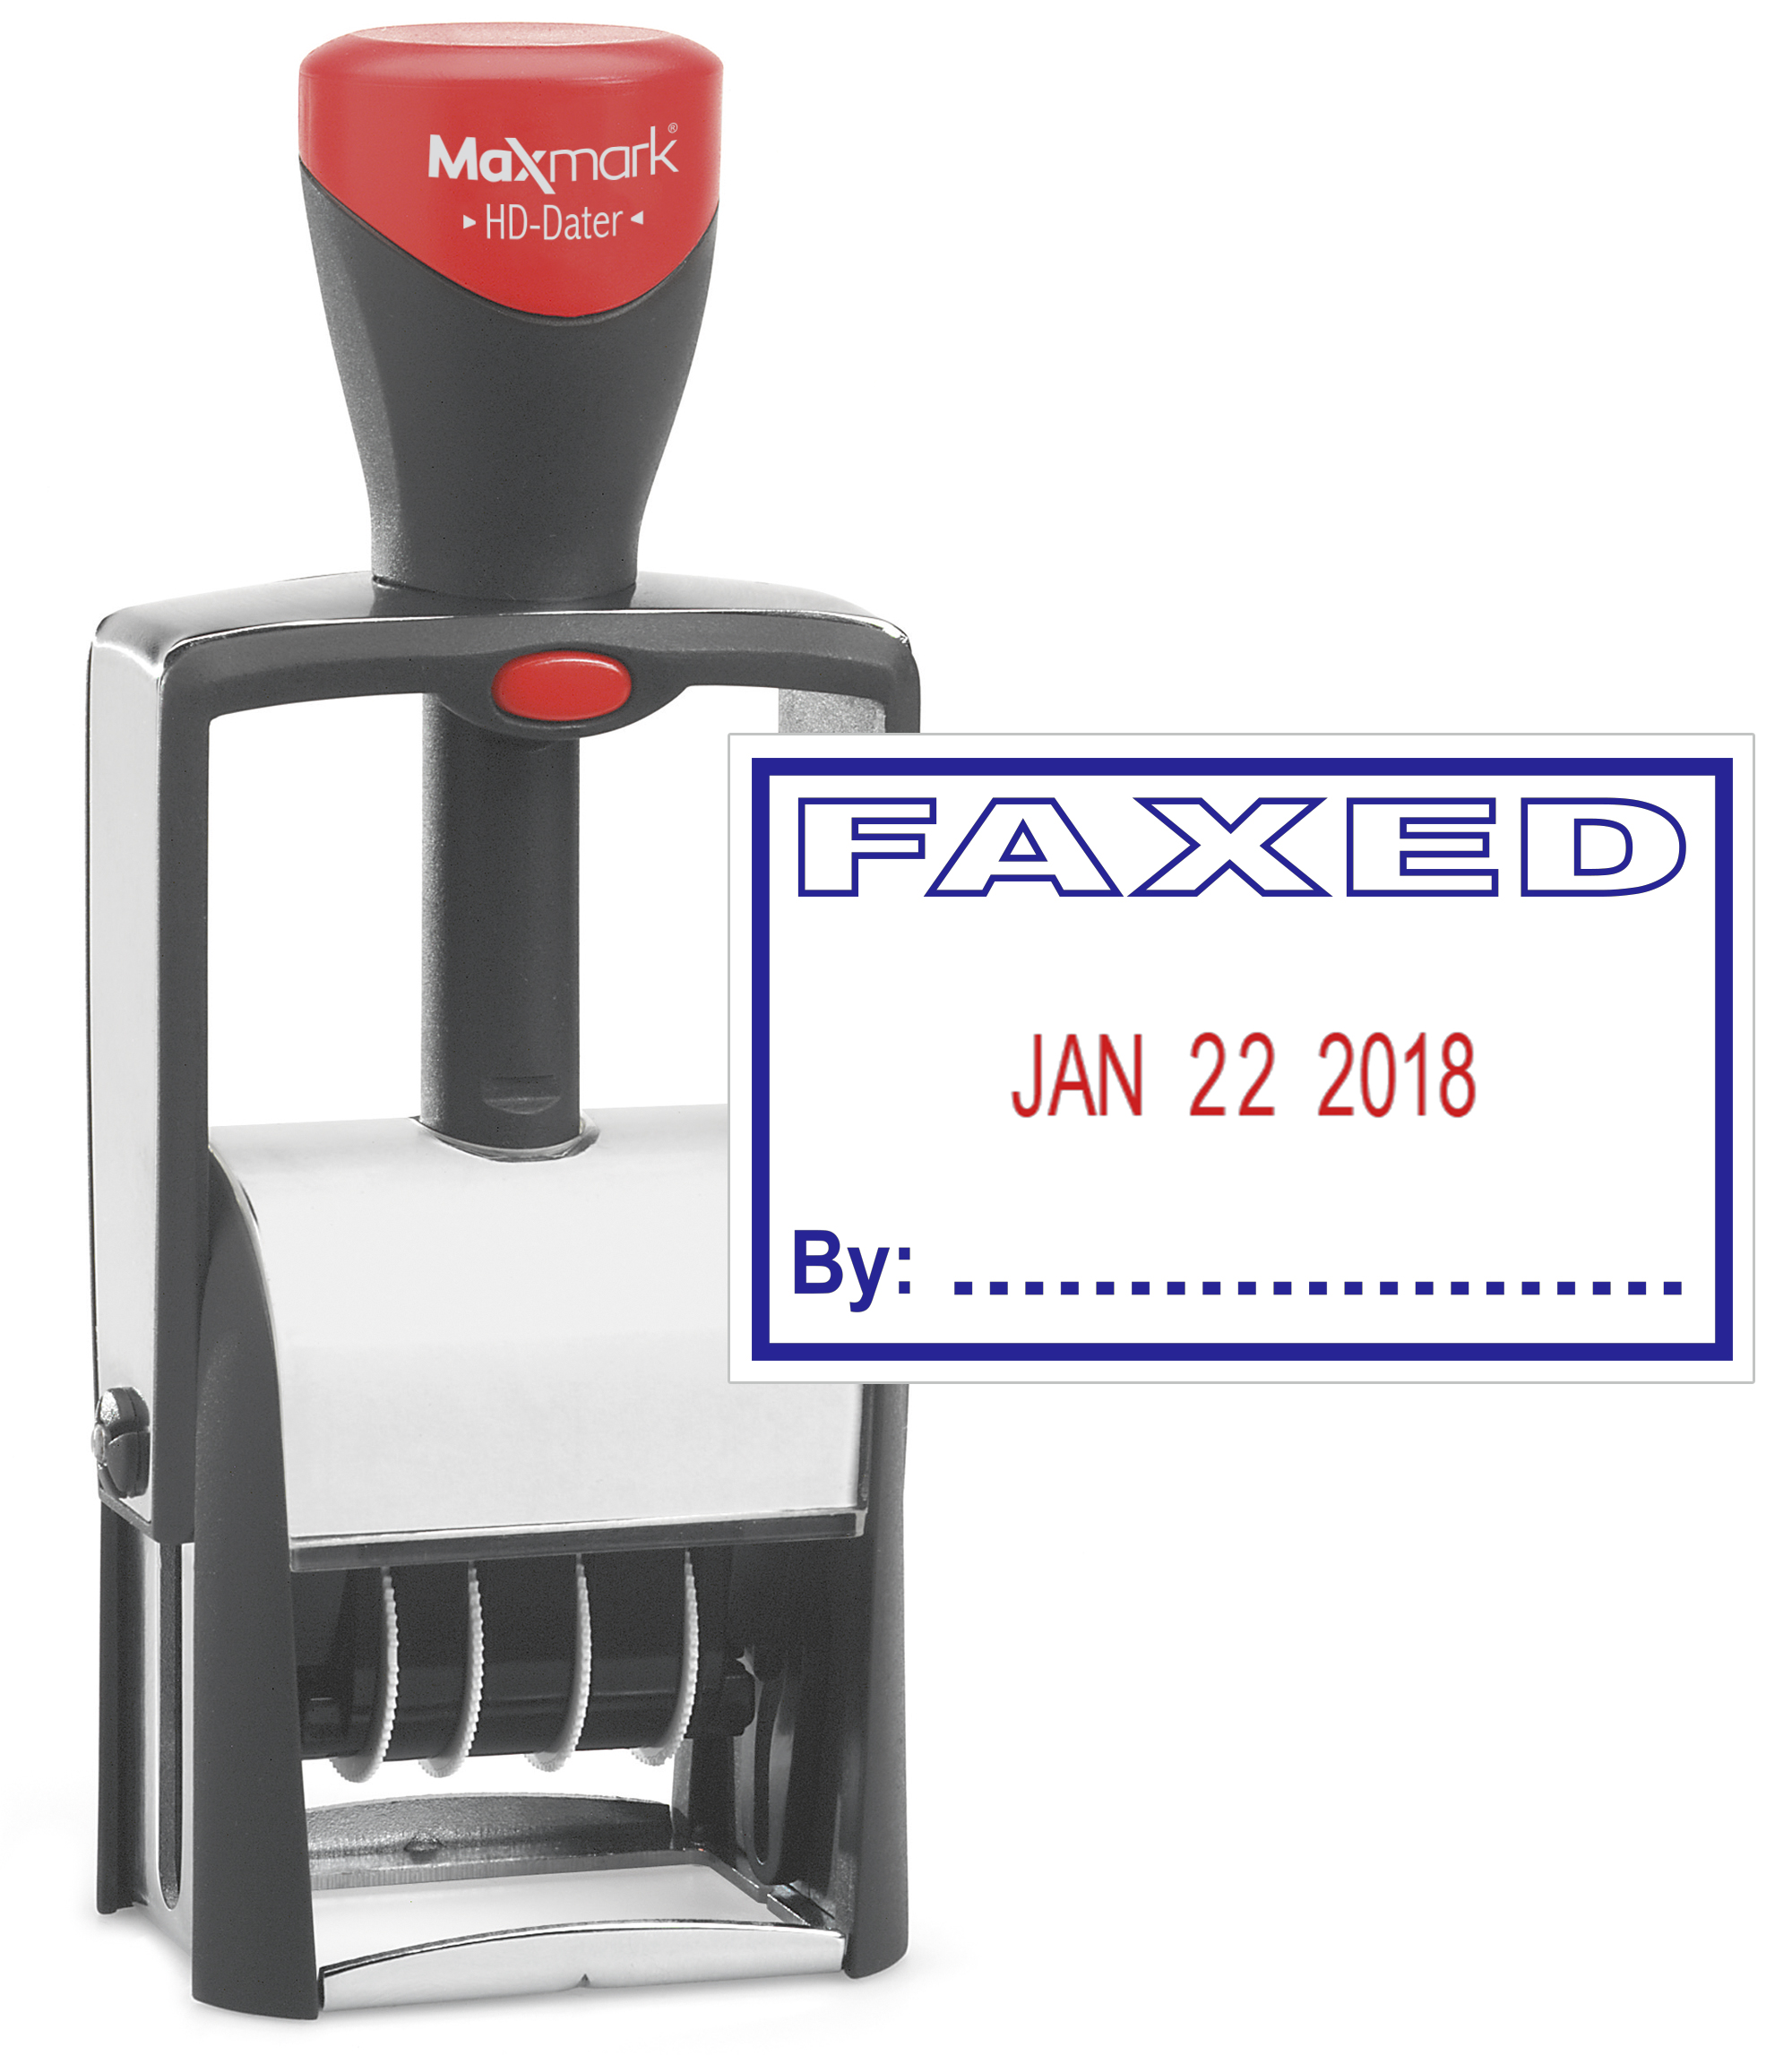 Heavy Duty Date Stamp with "FAXED" Self Inking Stamp - 2 Color Blue/Red Ink